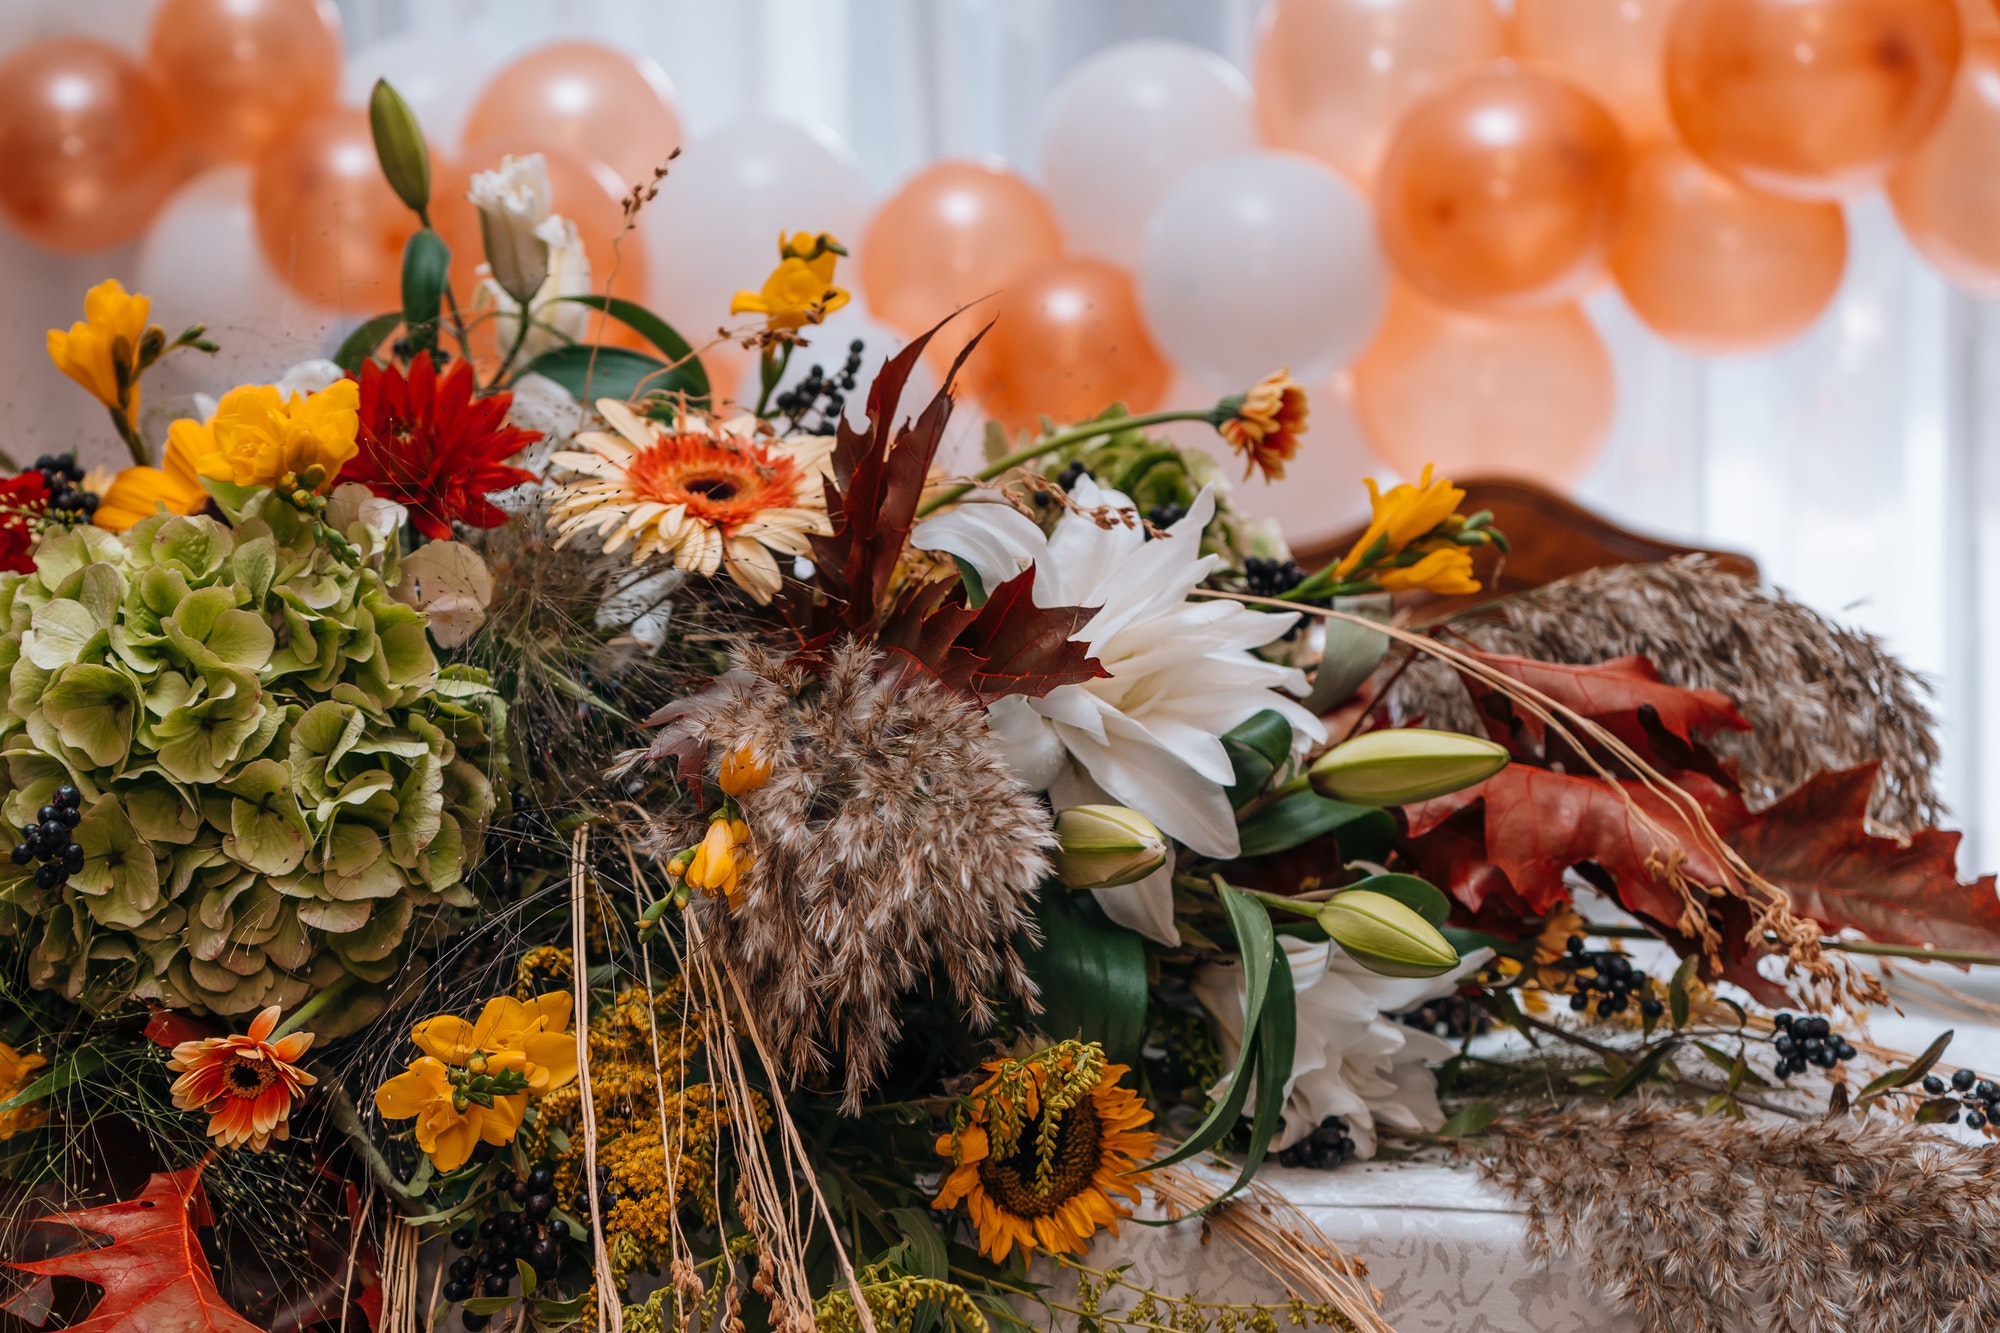 Event table decorated with a floral arrangement and balloons in the background